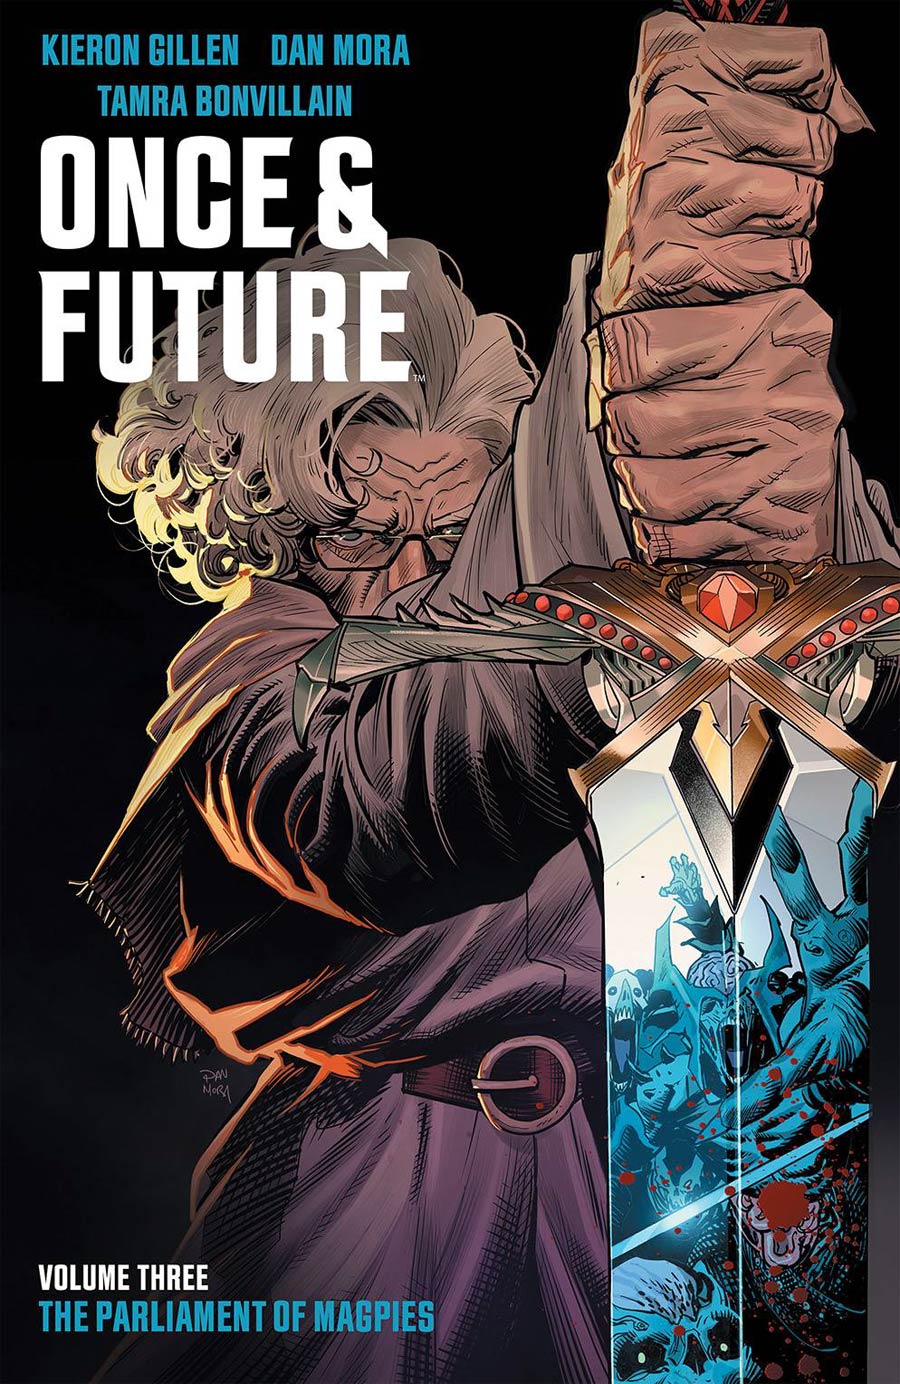 Once & Future Vol 3 Parliament Of Magpies TP